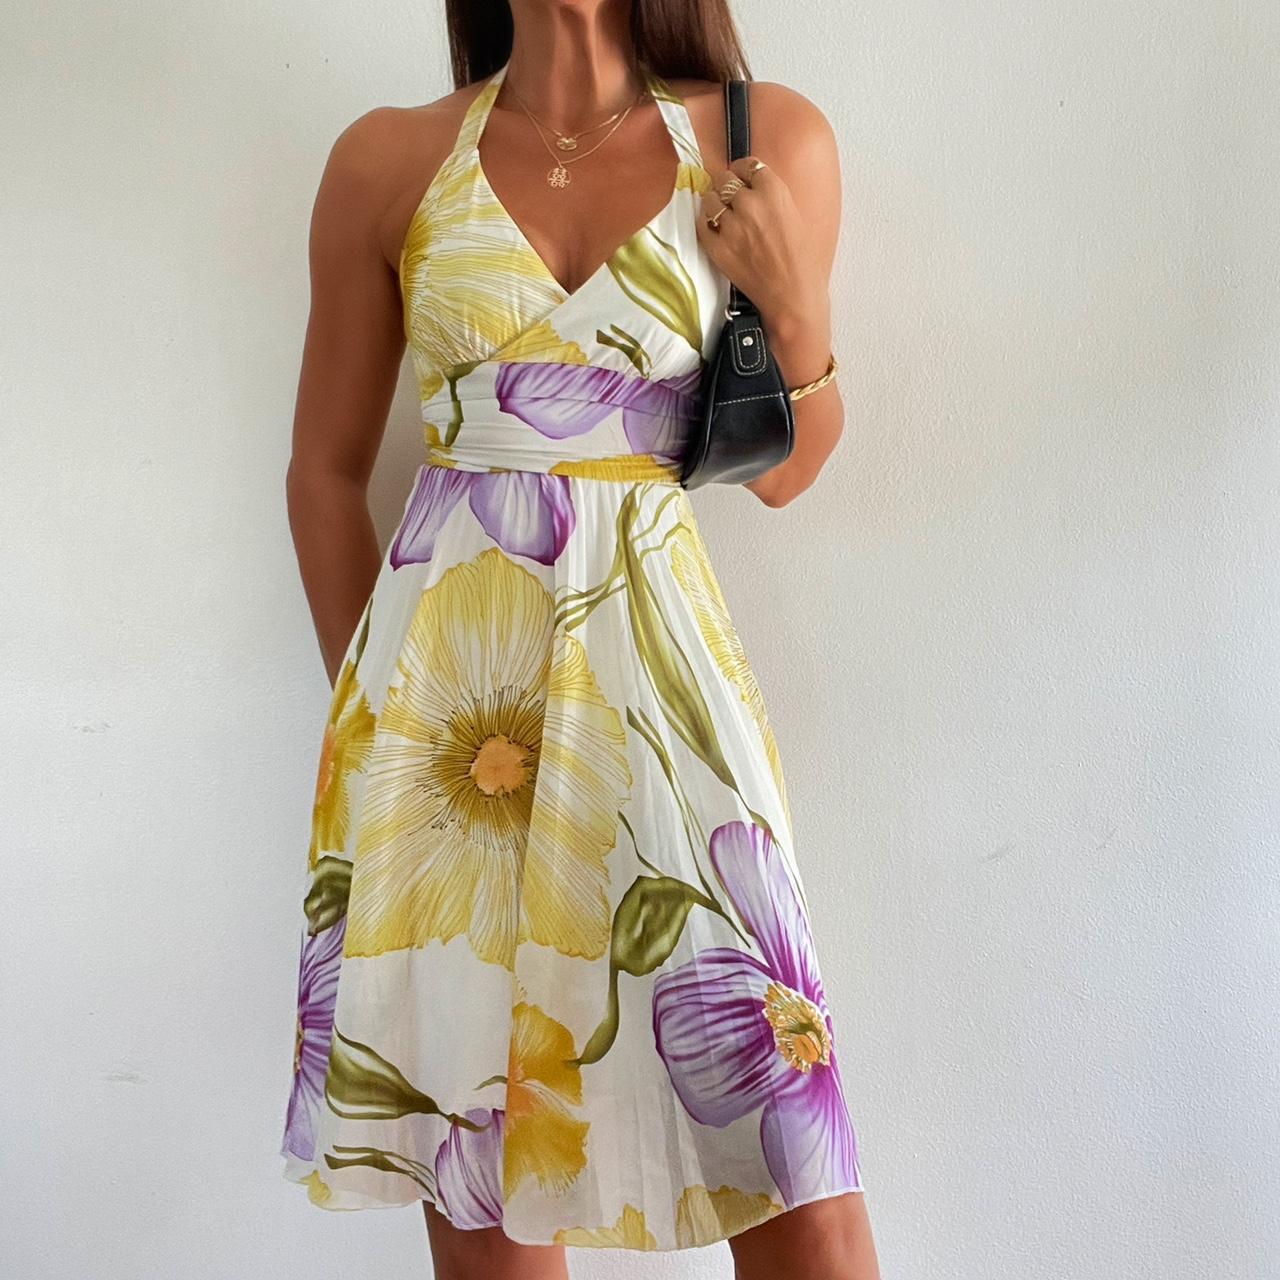 Product Image 1 - Vintage floral watercolor midi dress

The